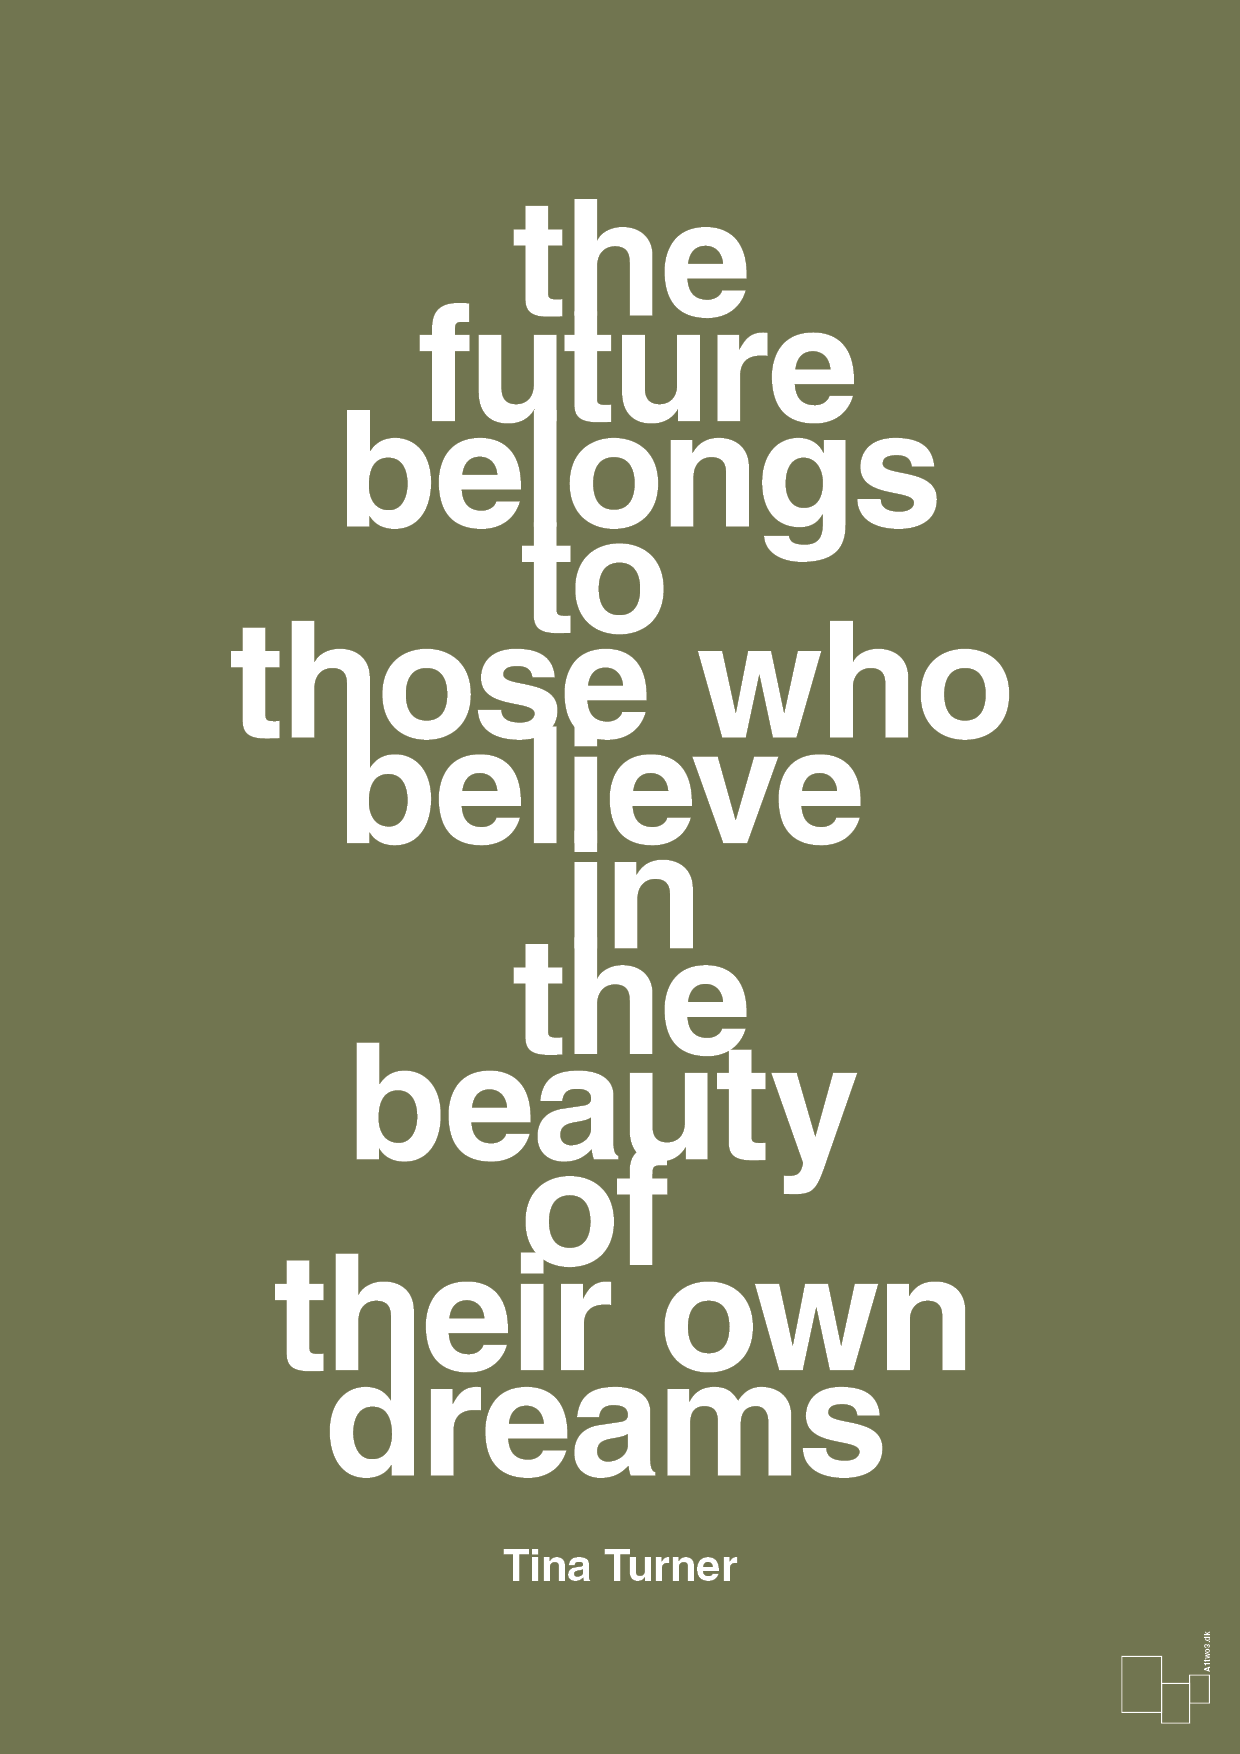 the future belongs to those who believe in the beauty of their own dreams - Plakat med Citater i Secret Meadow